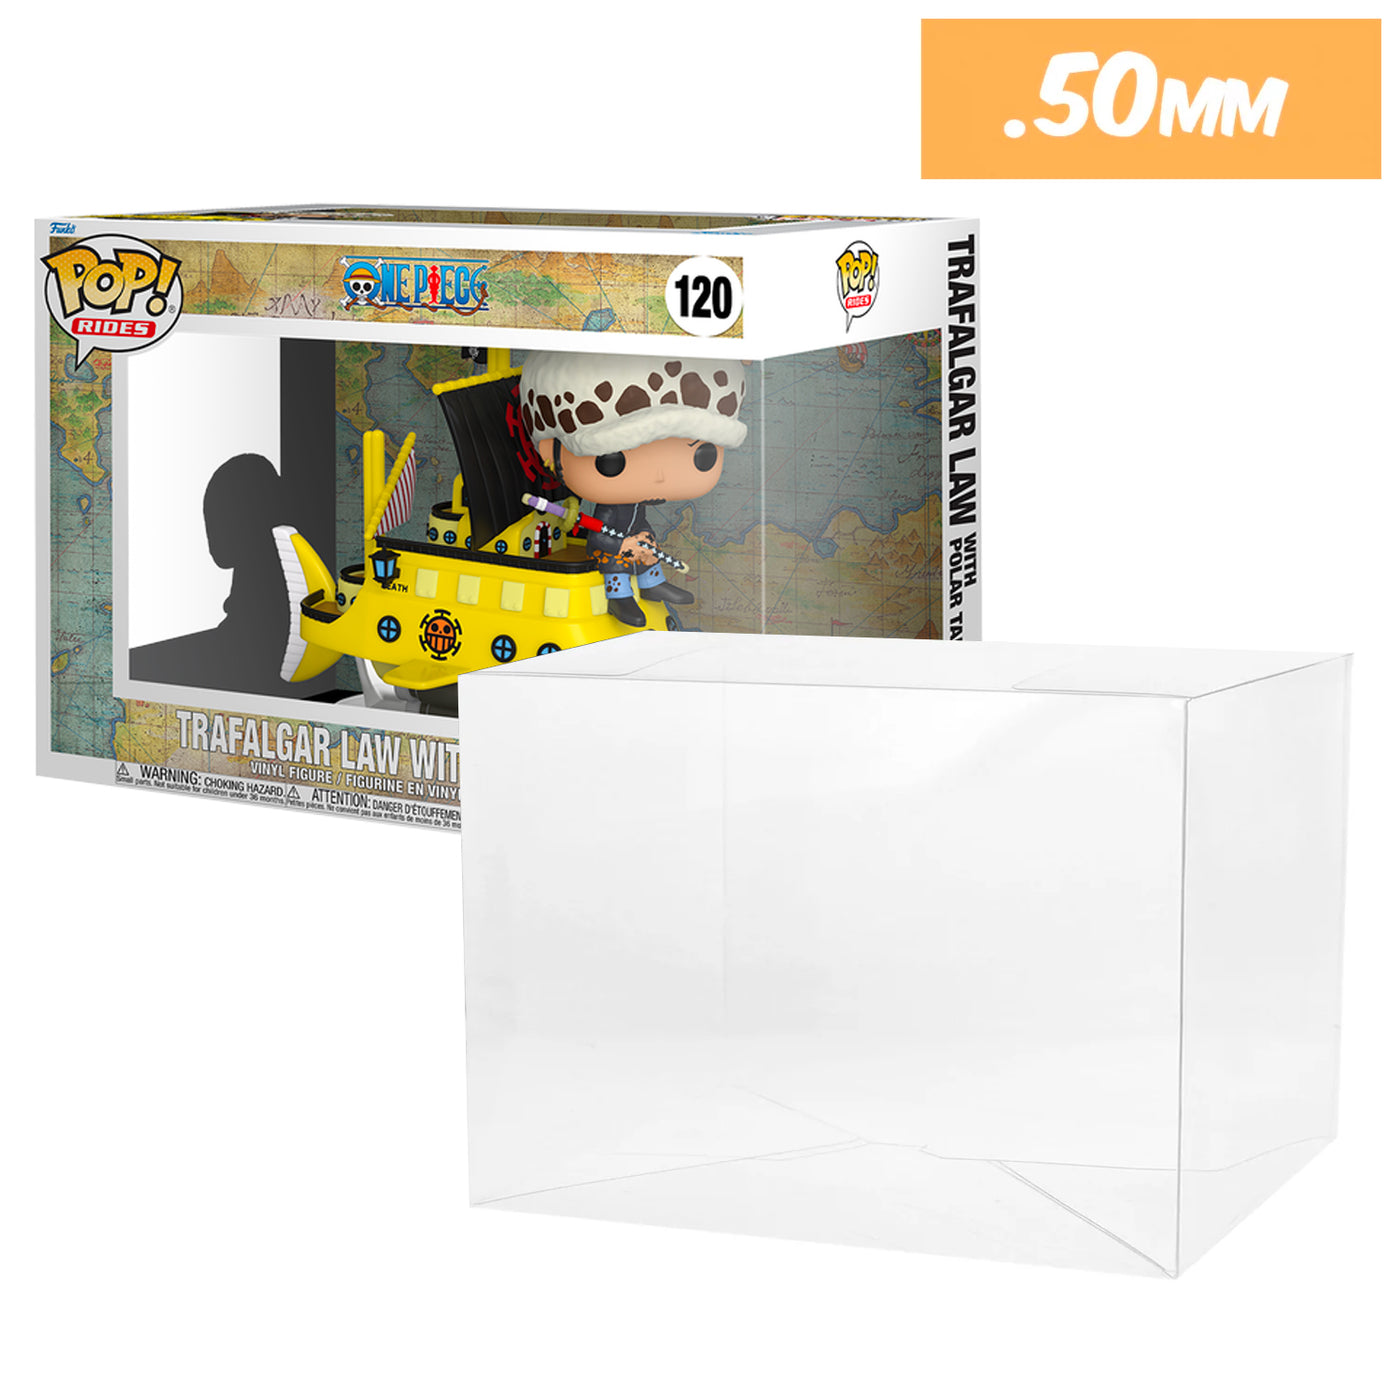 one piece trafalgar law with polar tang wondercon pop rides best funko pop protectors thick strong uv scratch flat top stack vinyl display geek plastic shield vaulted eco armor fits collect protect display case kollector